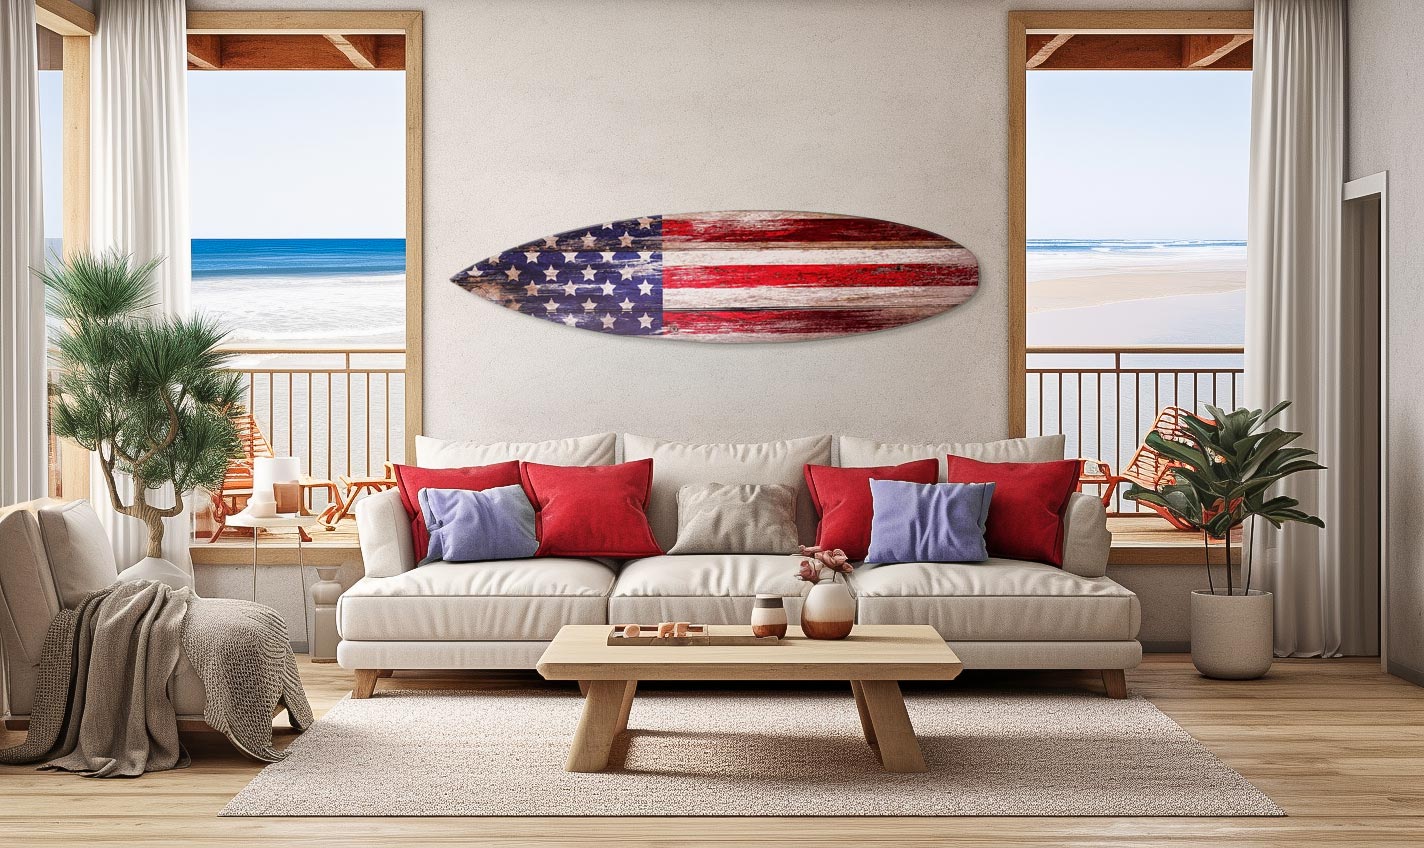 An American Art Decor USA AMERICAN FLAG SURFBOARD PLAQUE hanging in a living room overlooking the beach next to a couch.